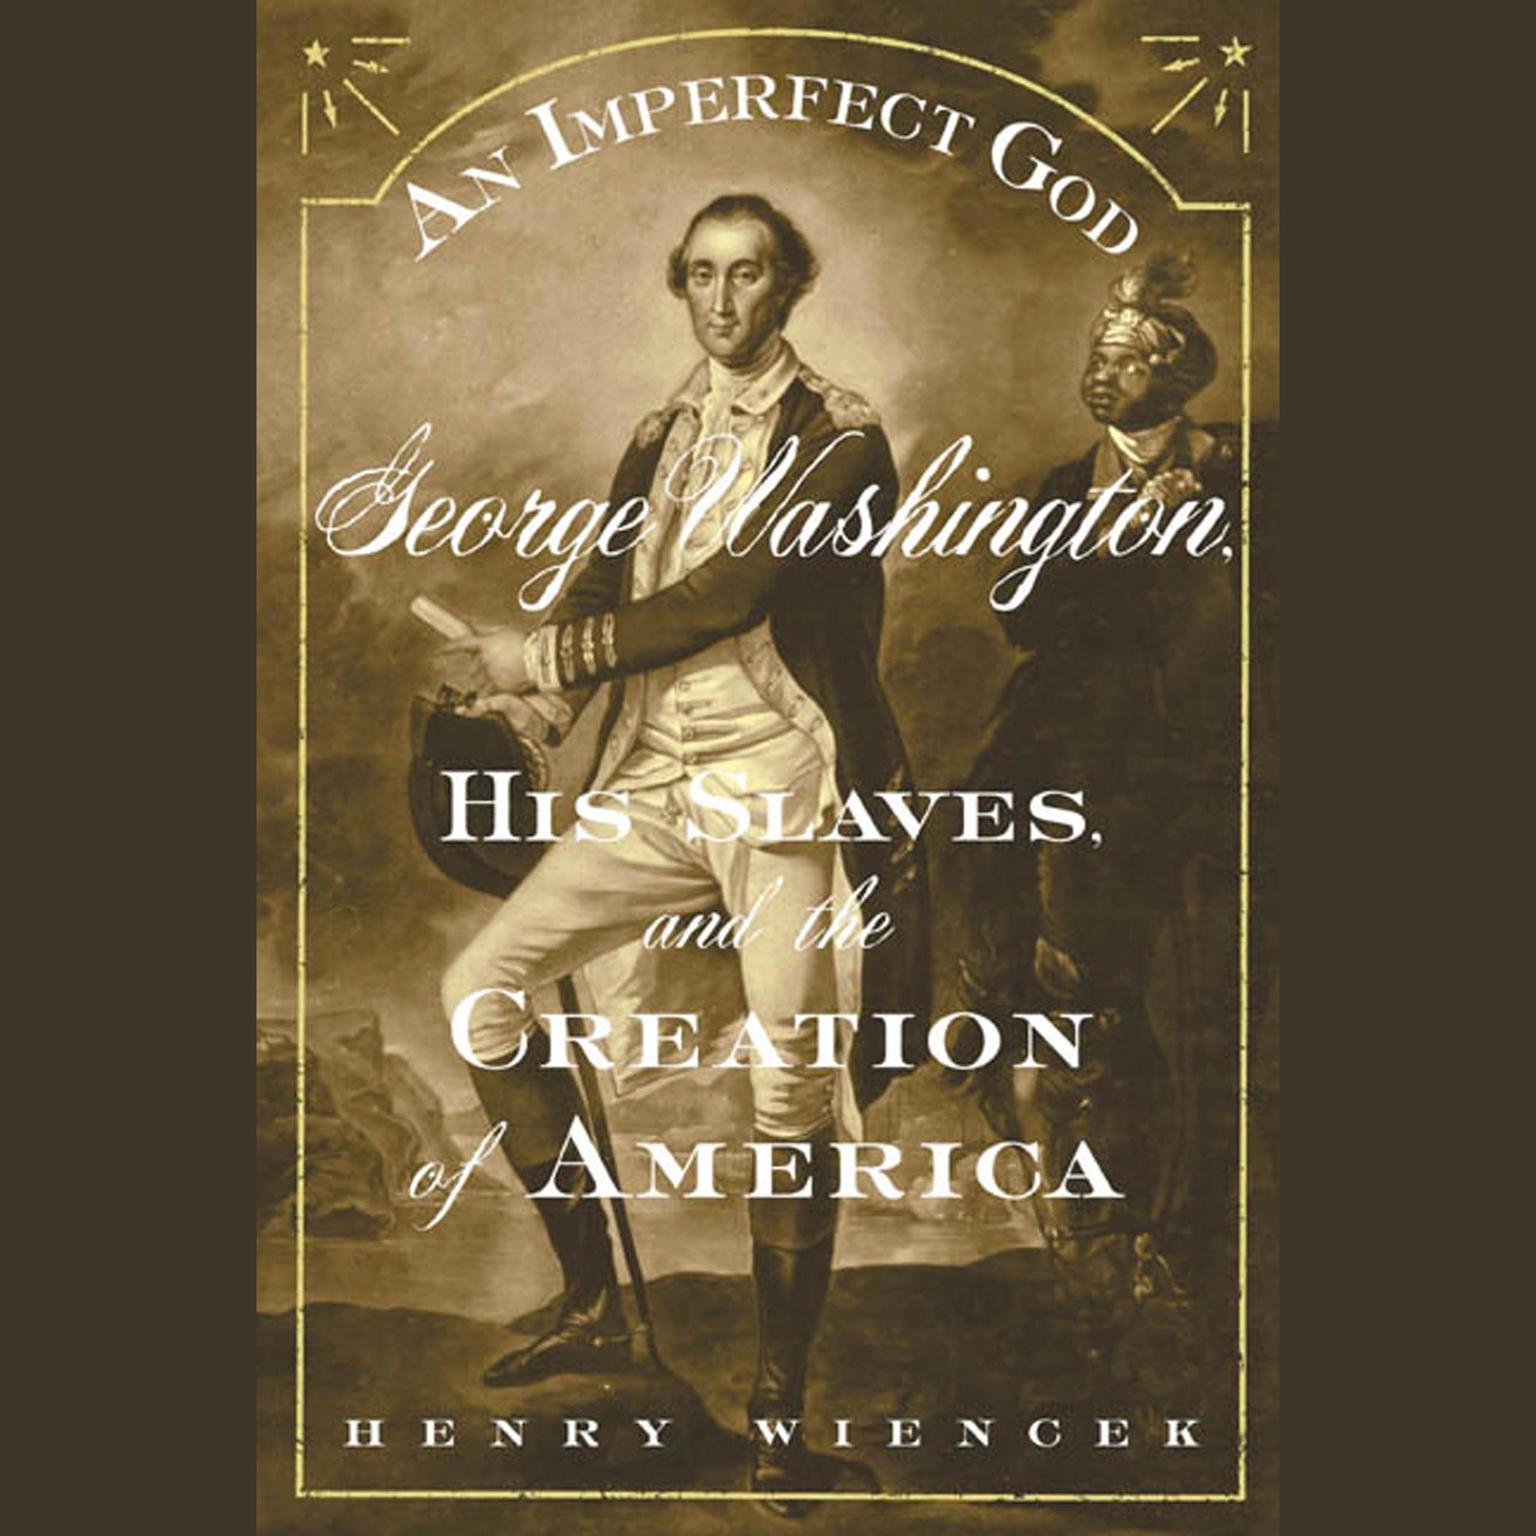 An Imperfect God (Abridged): George Washington, His Slaves, and the Creation of America Audiobook, by Henry Wiencek